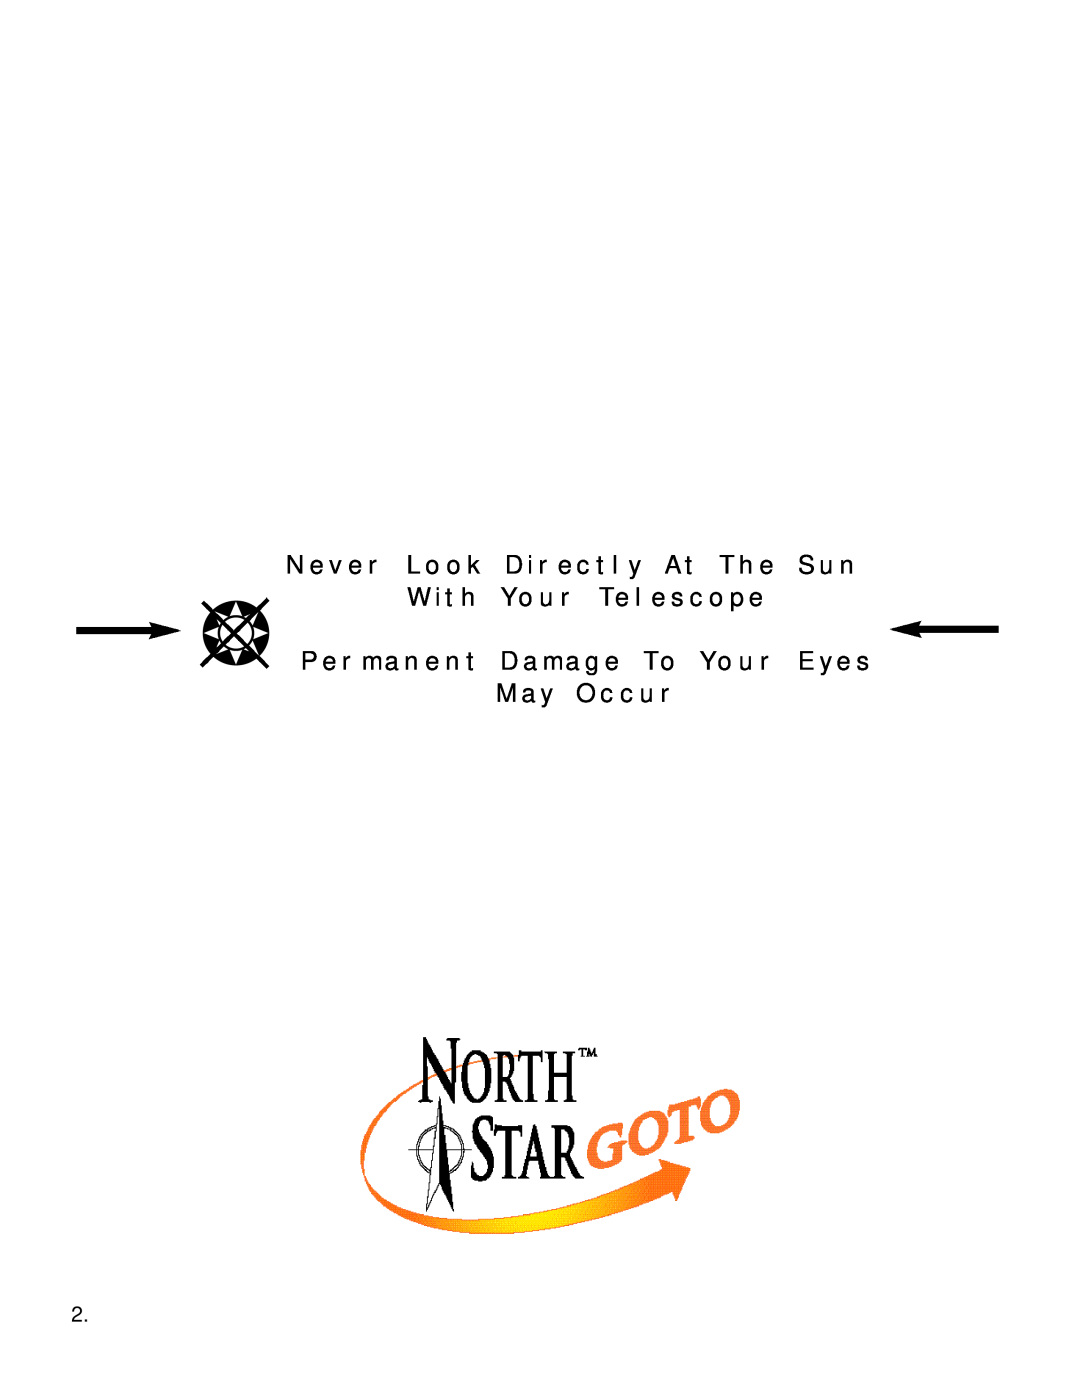 Bushnell North Star GOTO instruction manual Never Look Directly At The Sun 